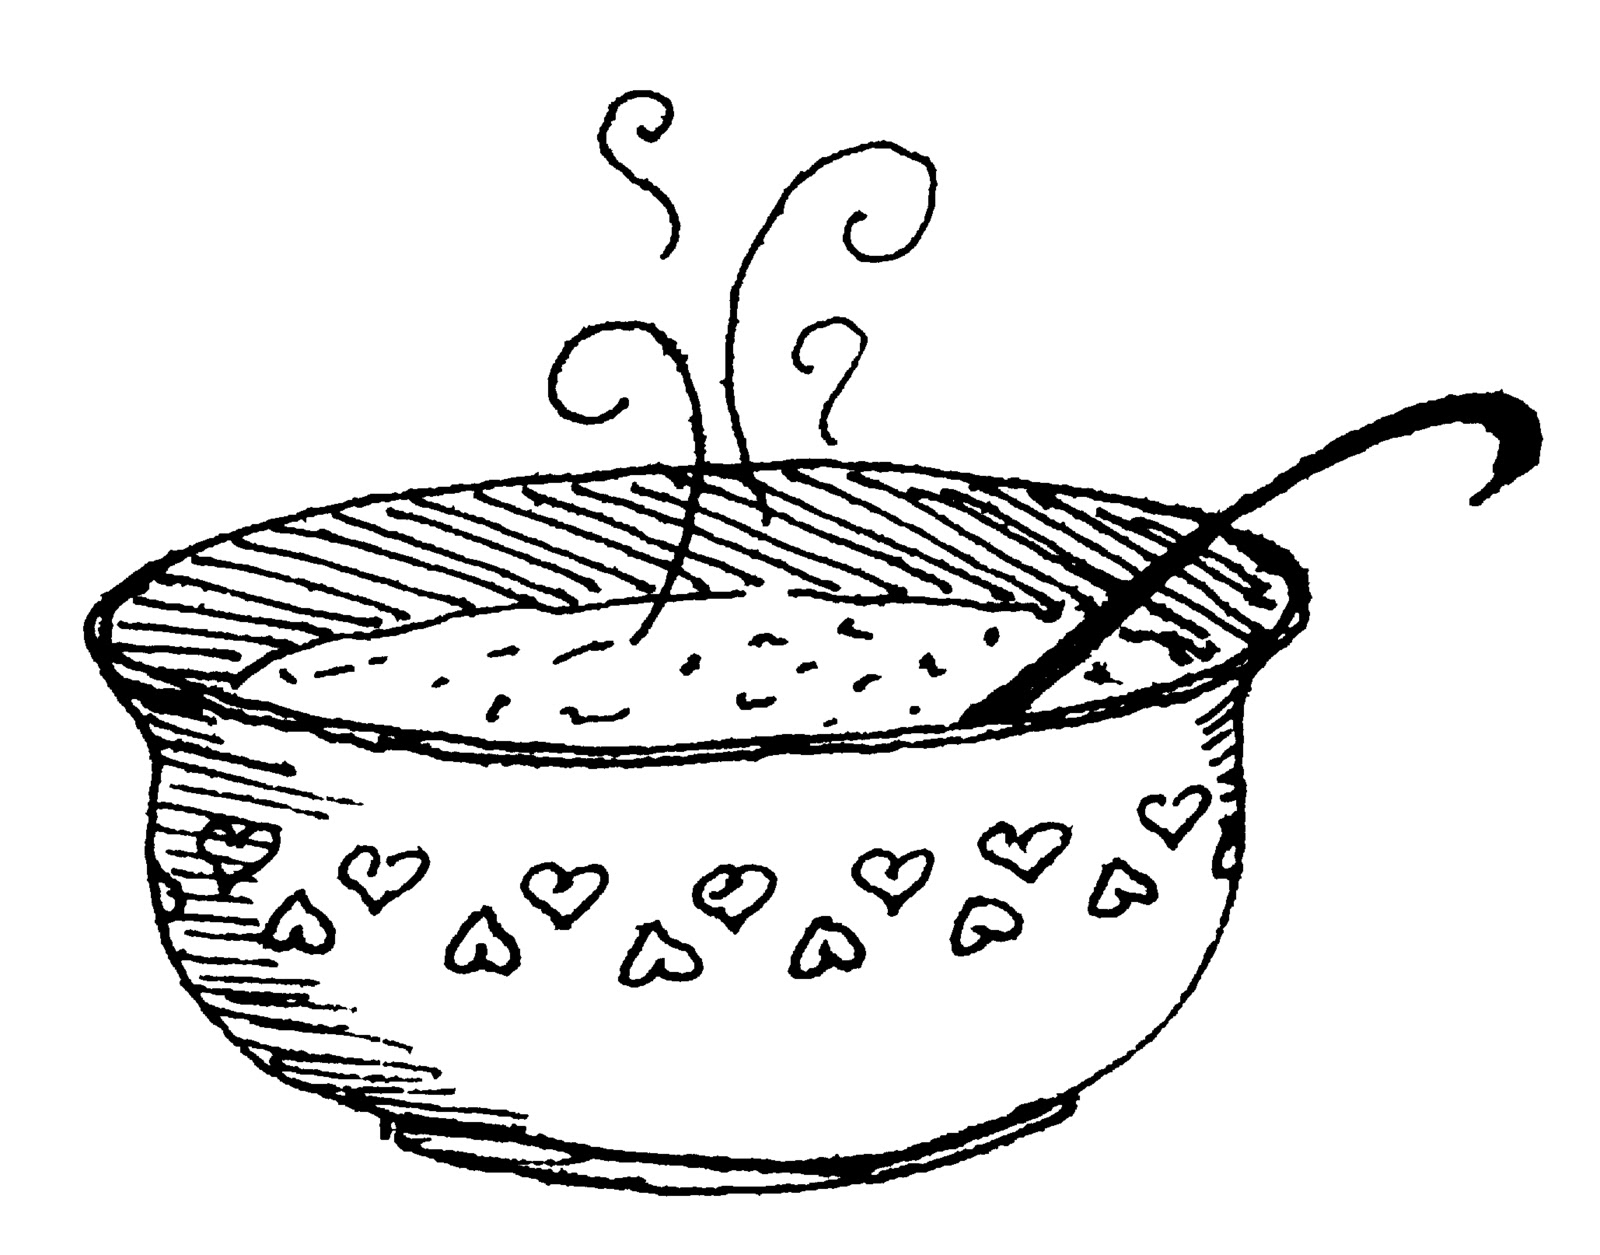 Free Soup Clip Art Black And White, Download Free Soup Clip Art Black ...